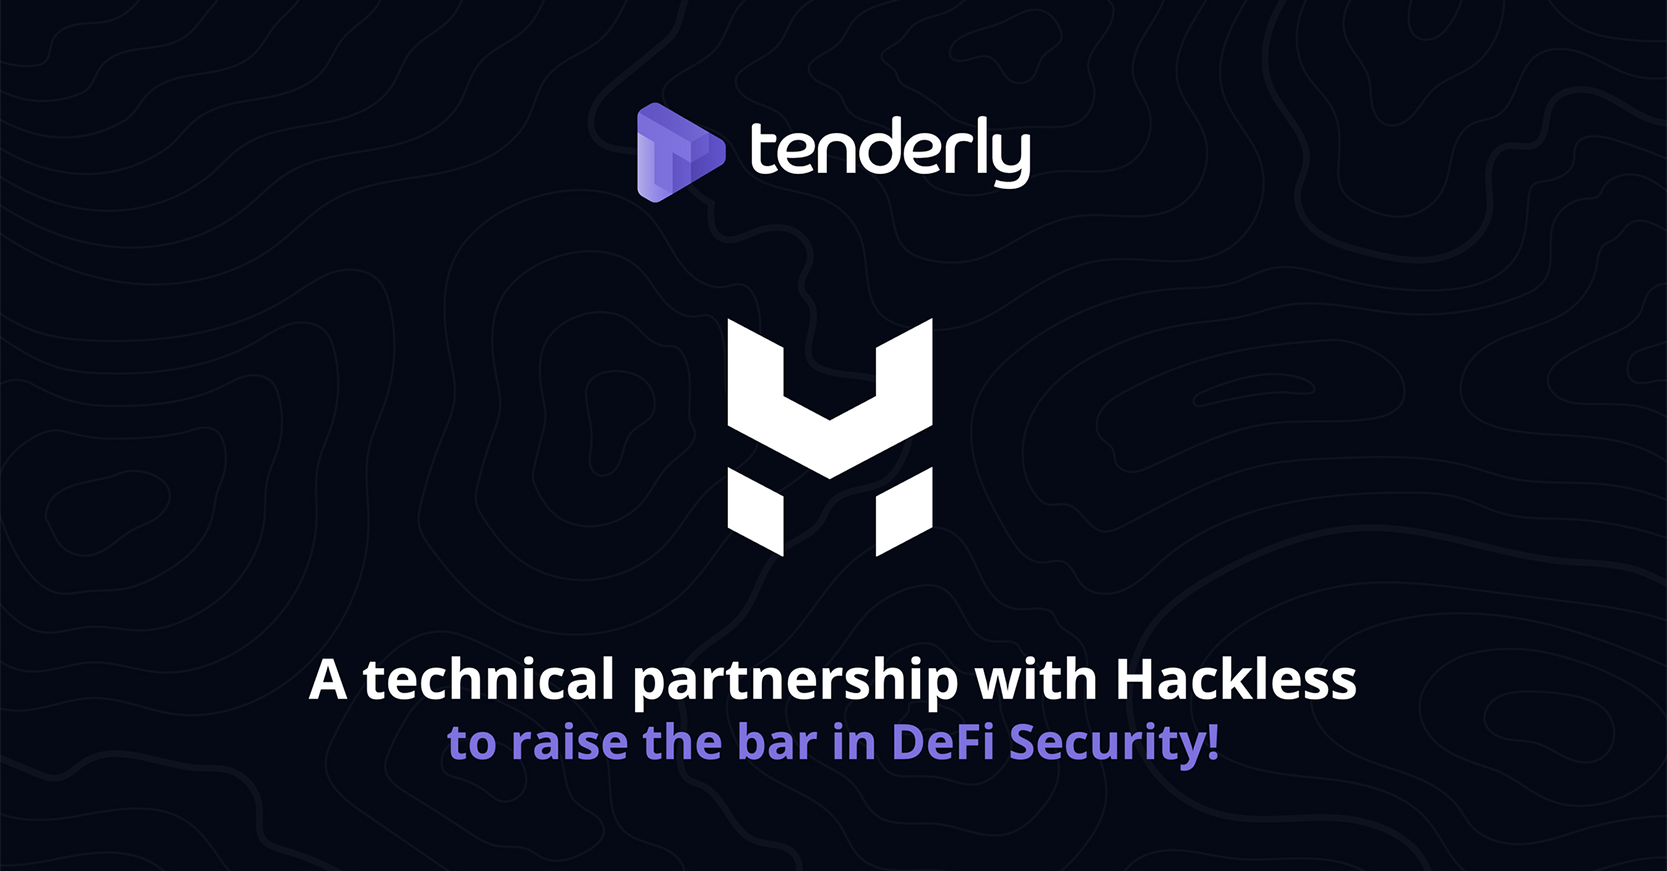 Raising the Bar in DeFi Security - Tenderly and Hackless Technical Partnership